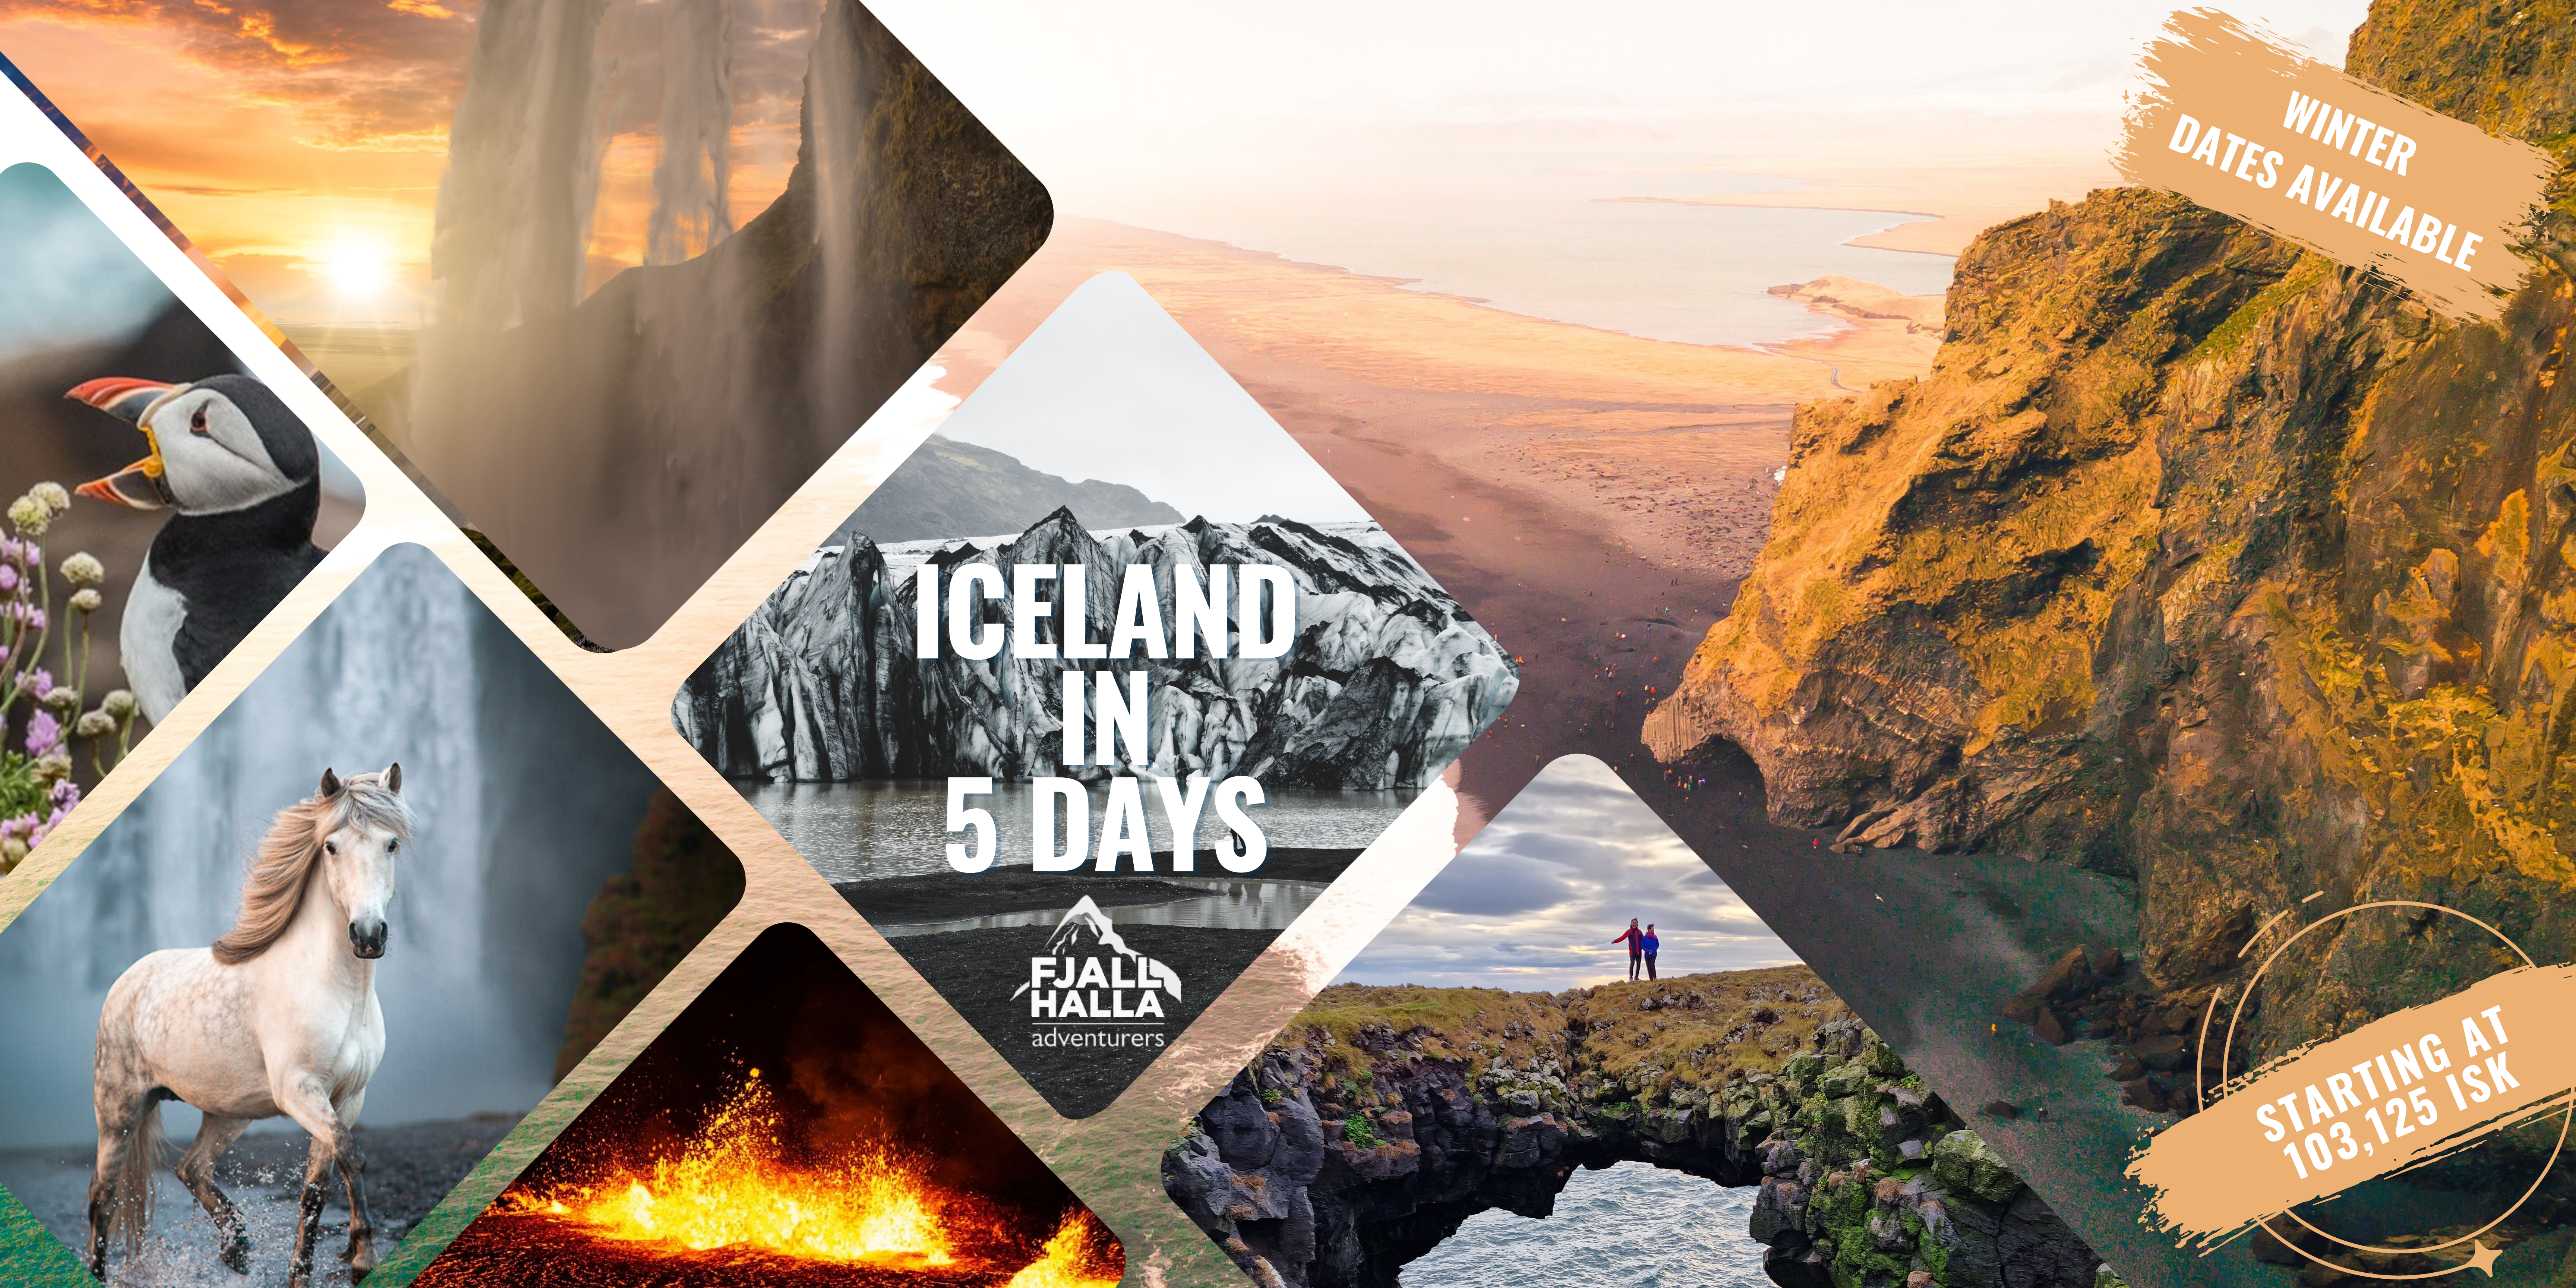 Iceland in 5 Days - The best of Iceland in 5 Days